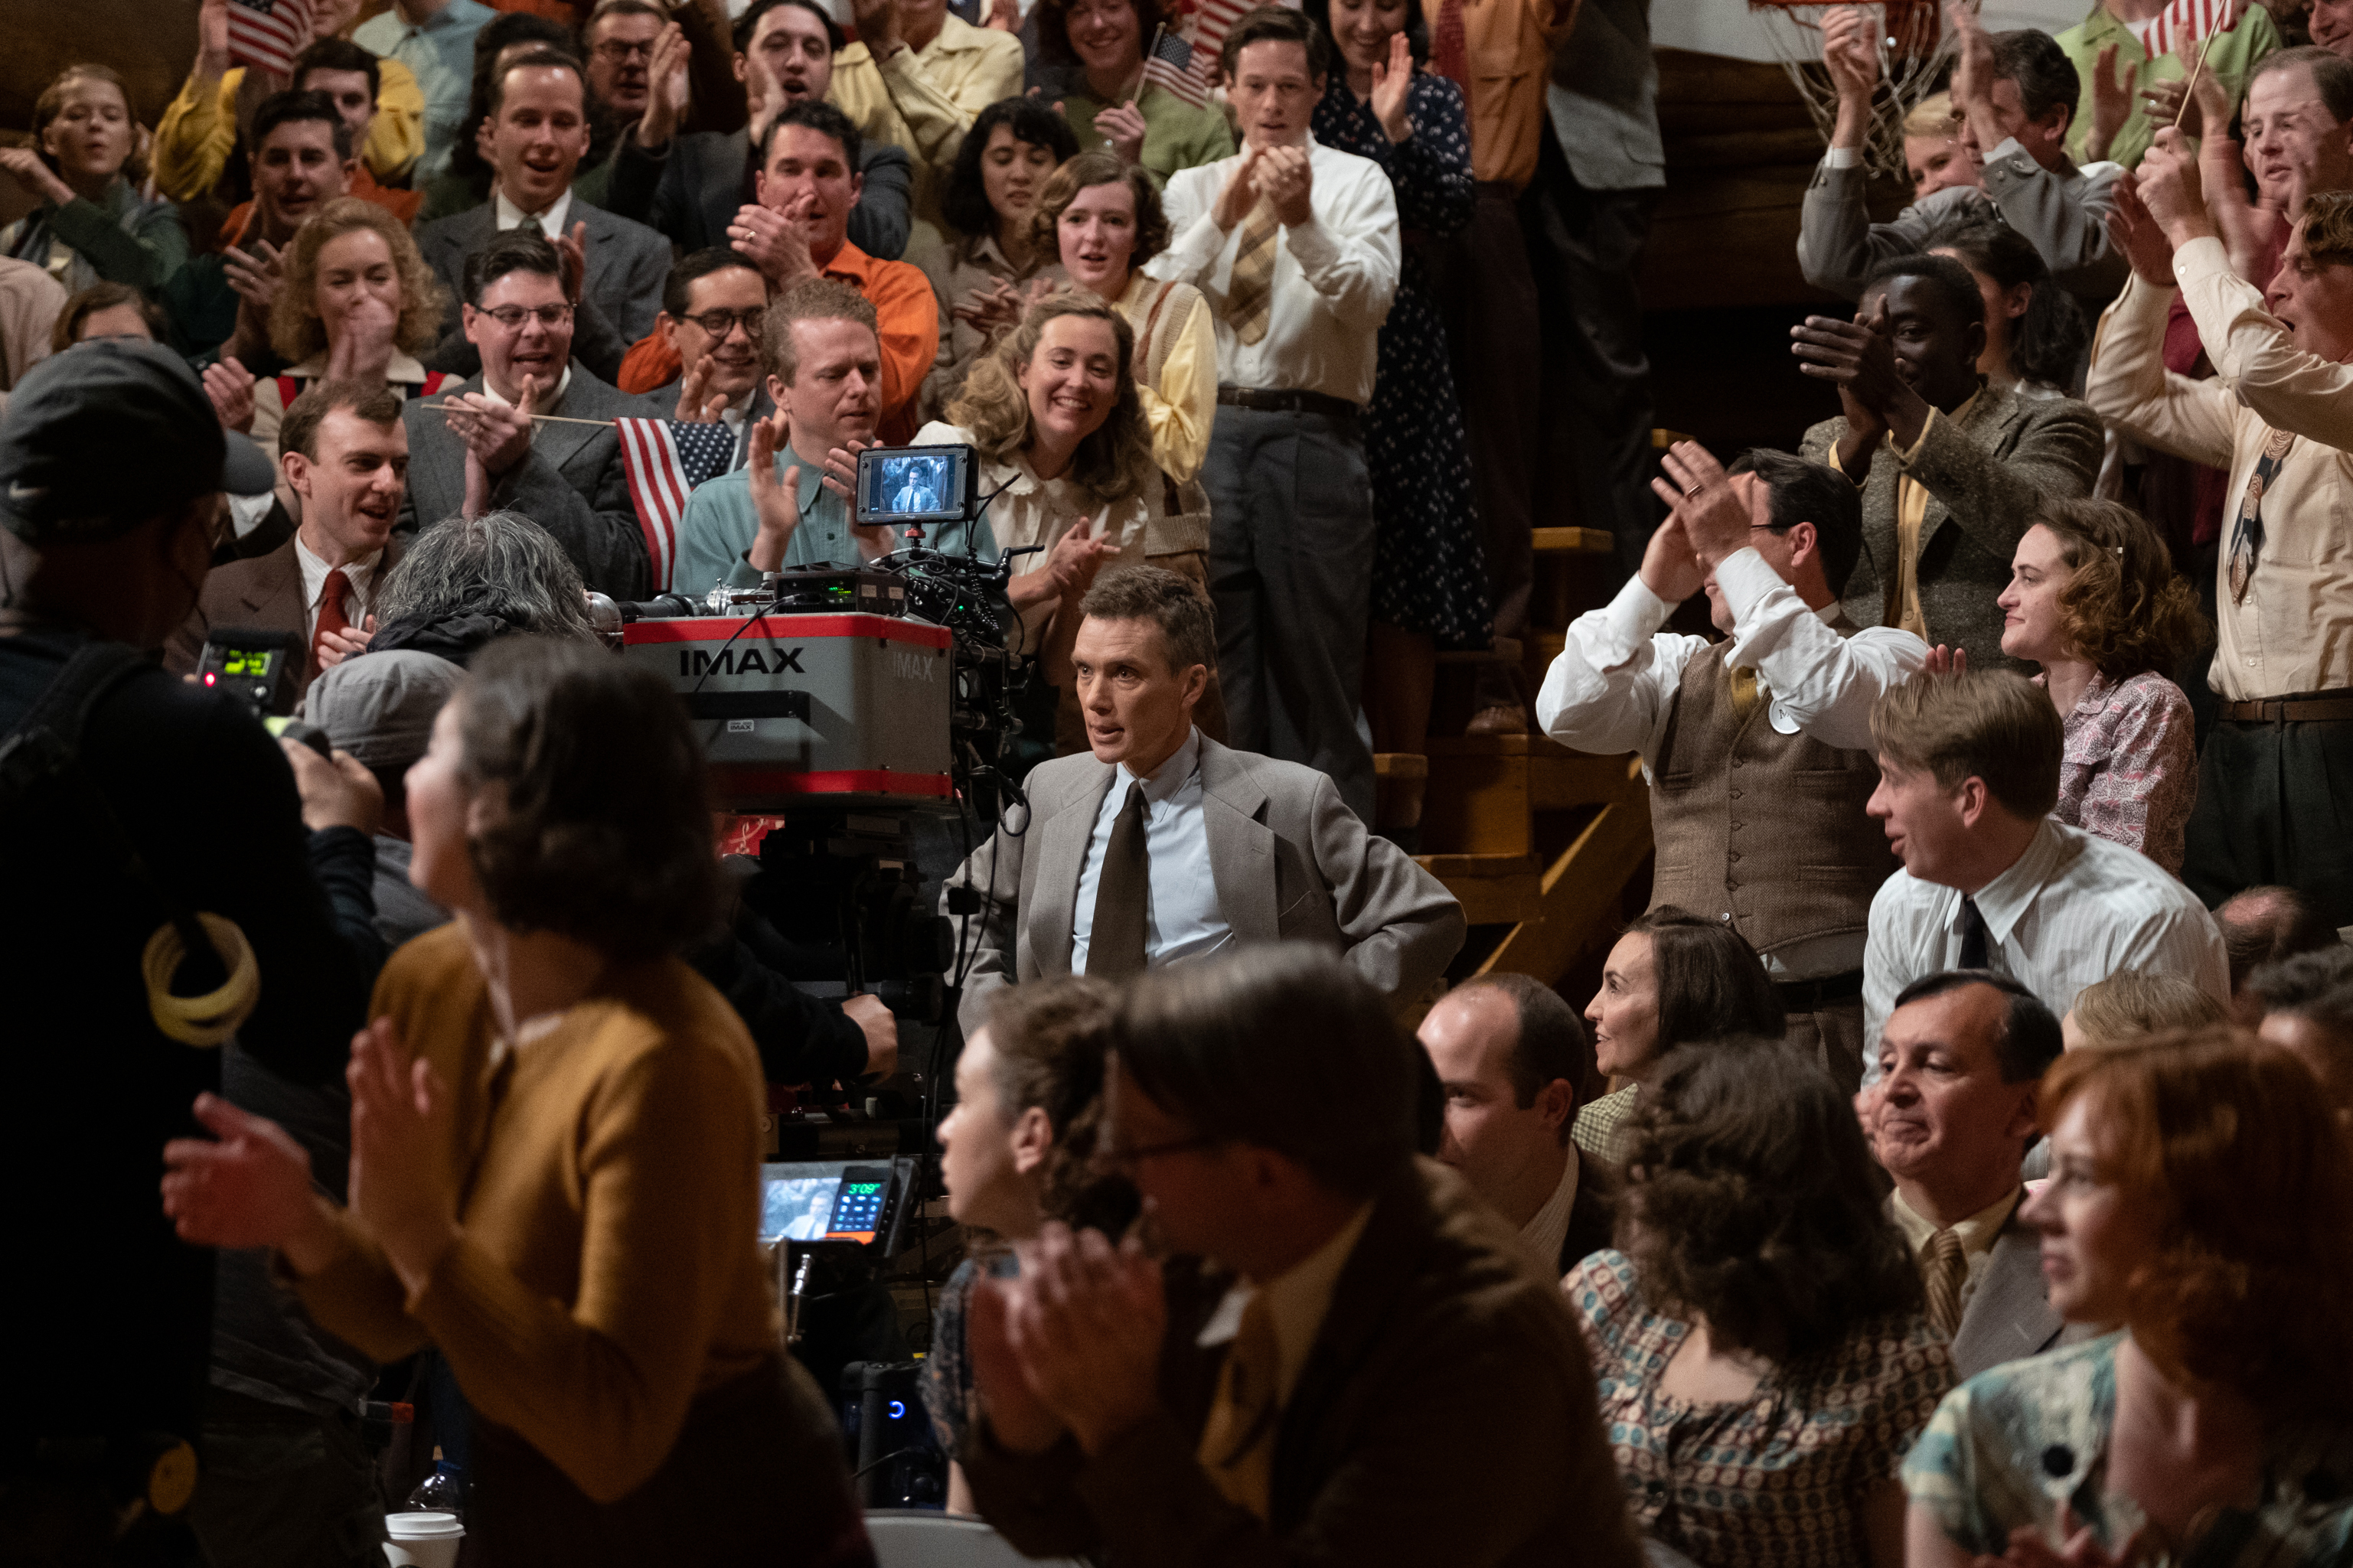 HD desktop wallpaper featuring a vibrant crowd scene with applause, possibly from the film Oppenheimer, suitable for use as a background.